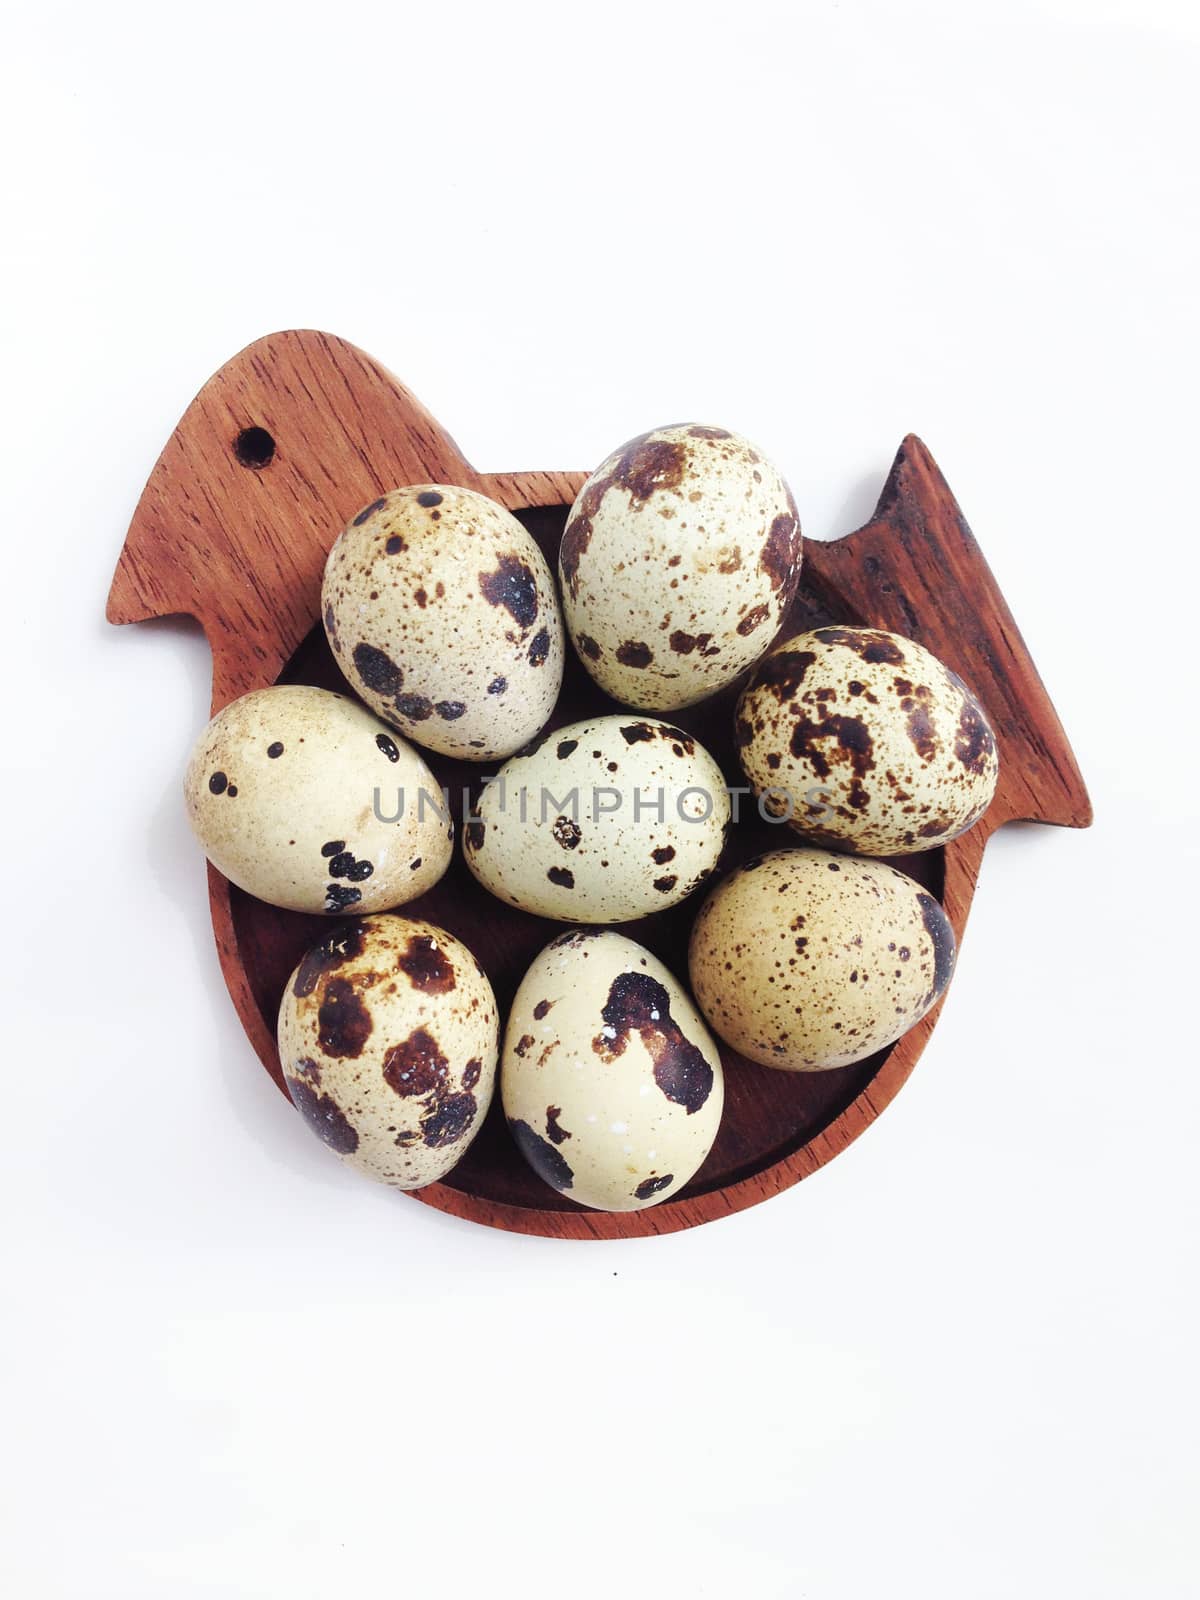 Quail eggs on wooden bird shaped saucer on white background by Bowonpat